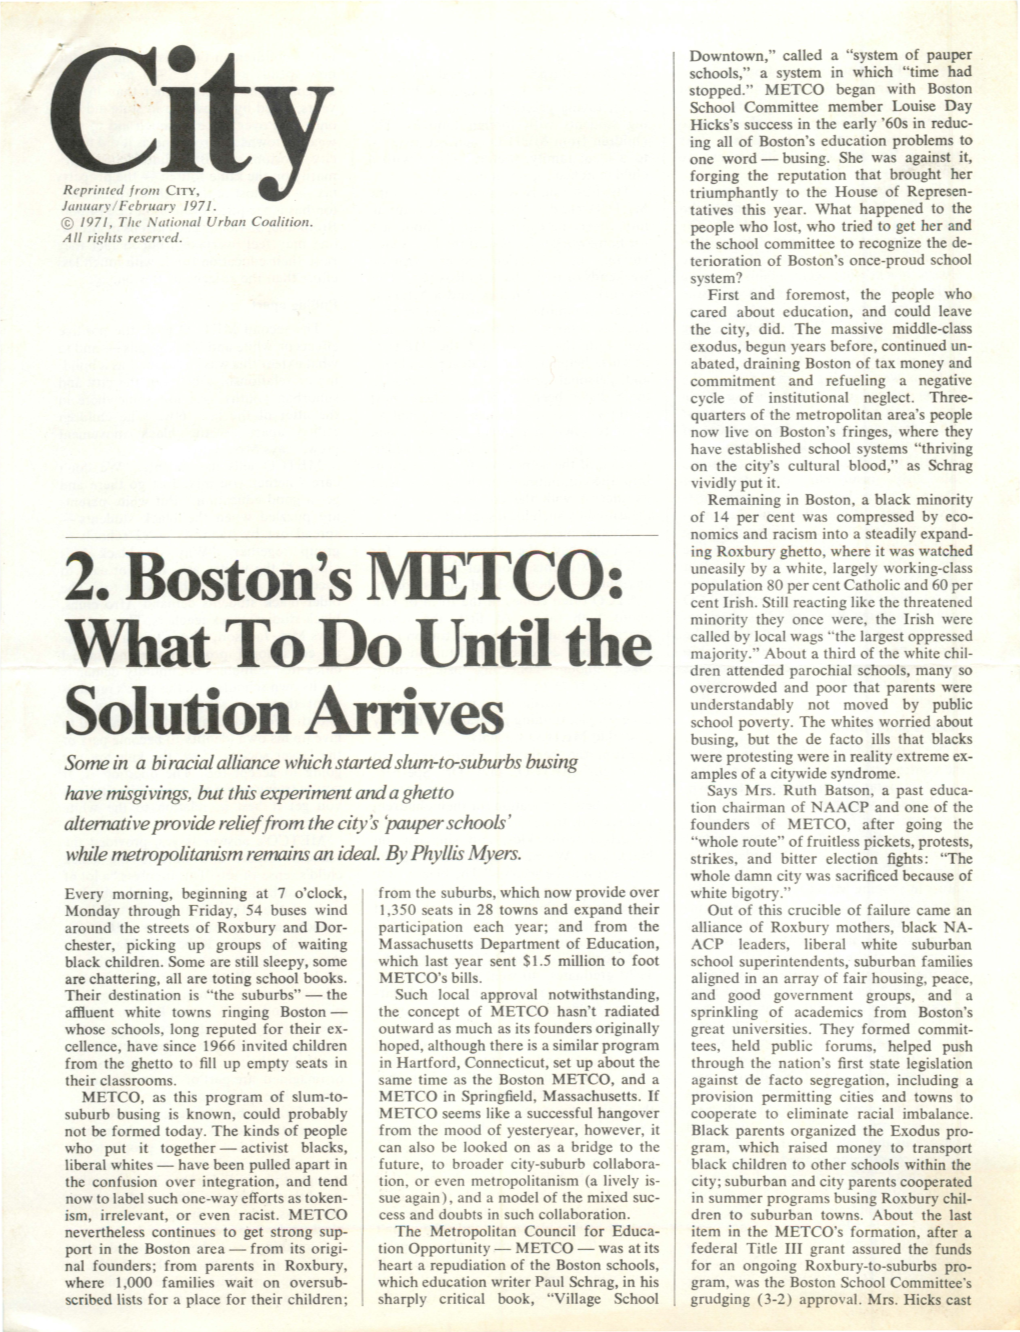 Boston's METCO: What to Do Until the Solution Arrives